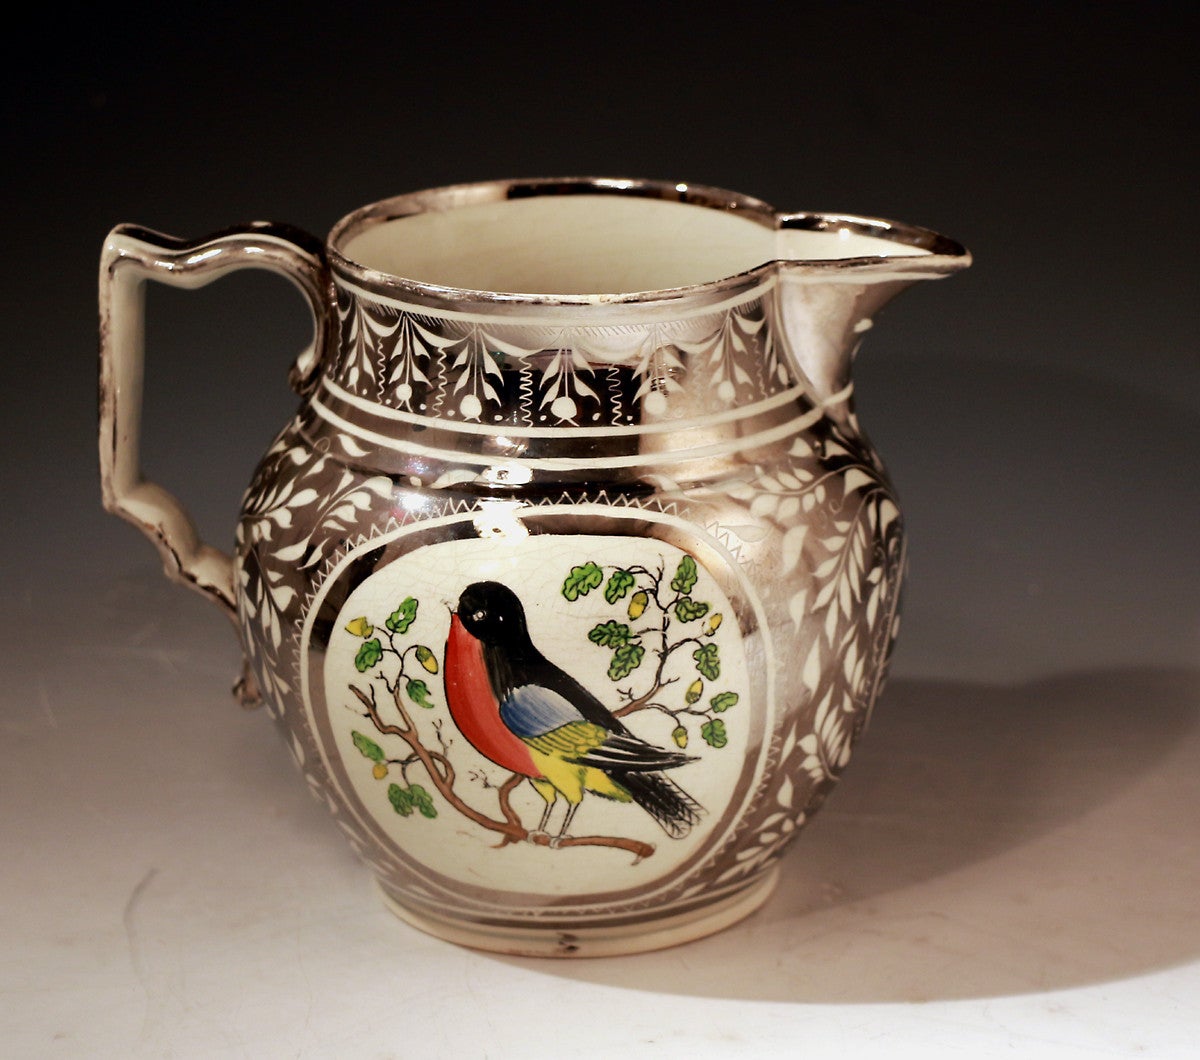 Antique silver luster pottery pitcher with image of a Robin. 